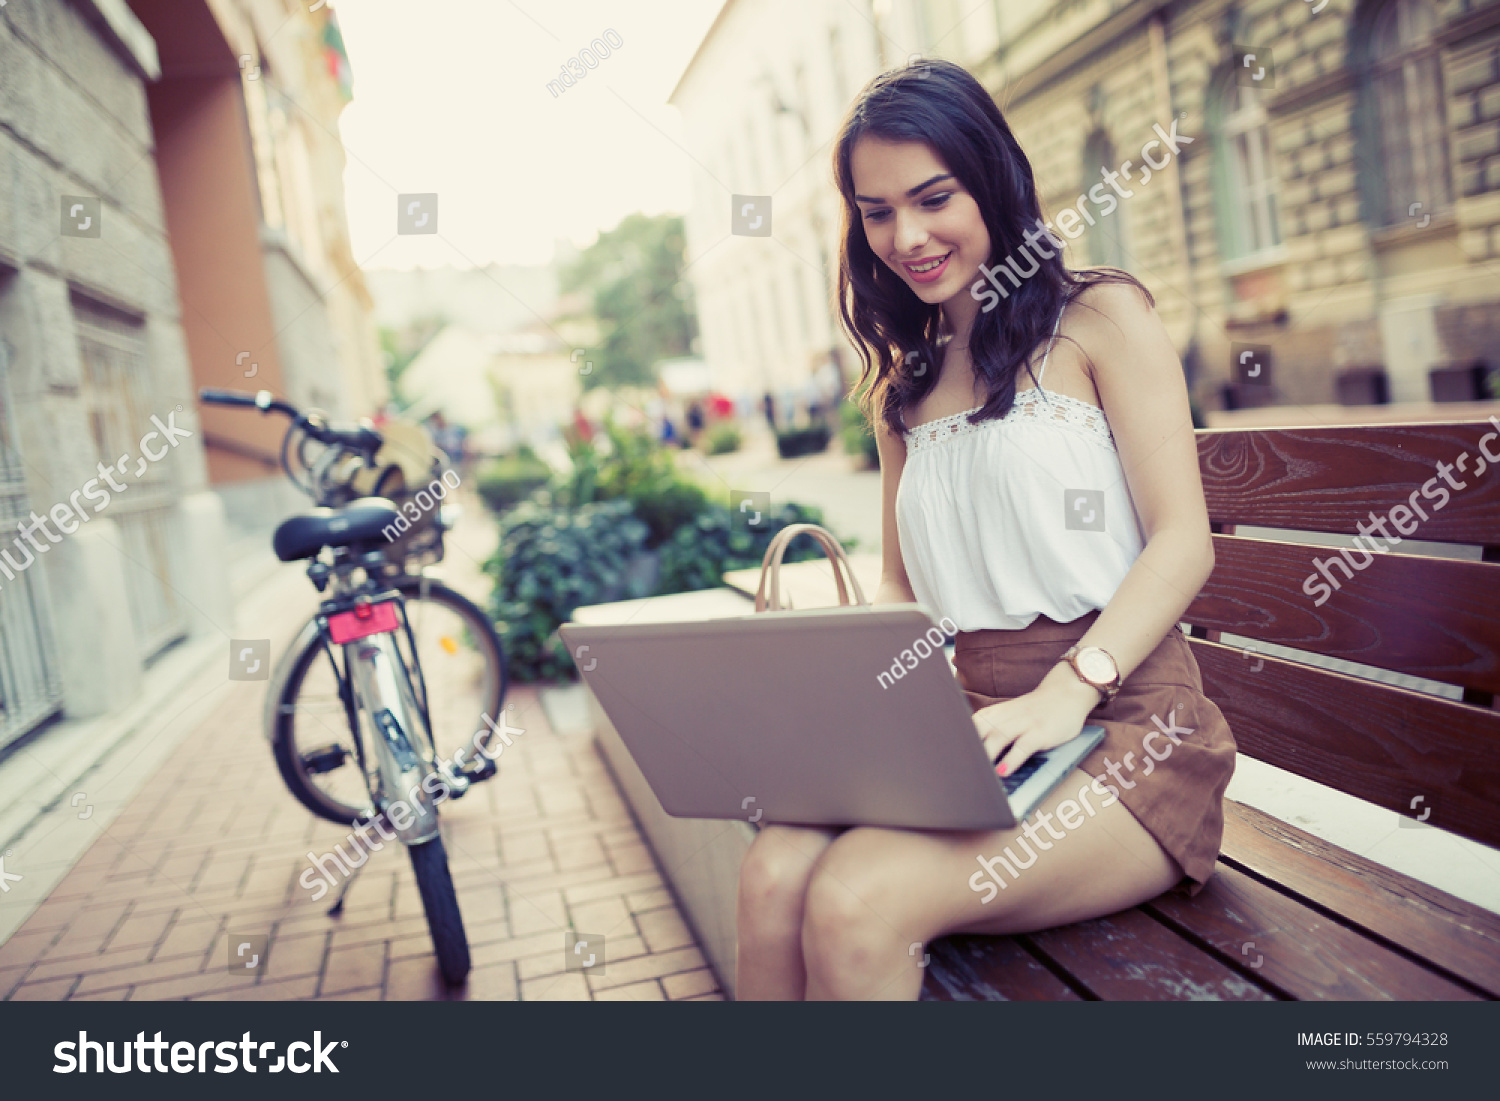 Female student using laptop in city #559794328